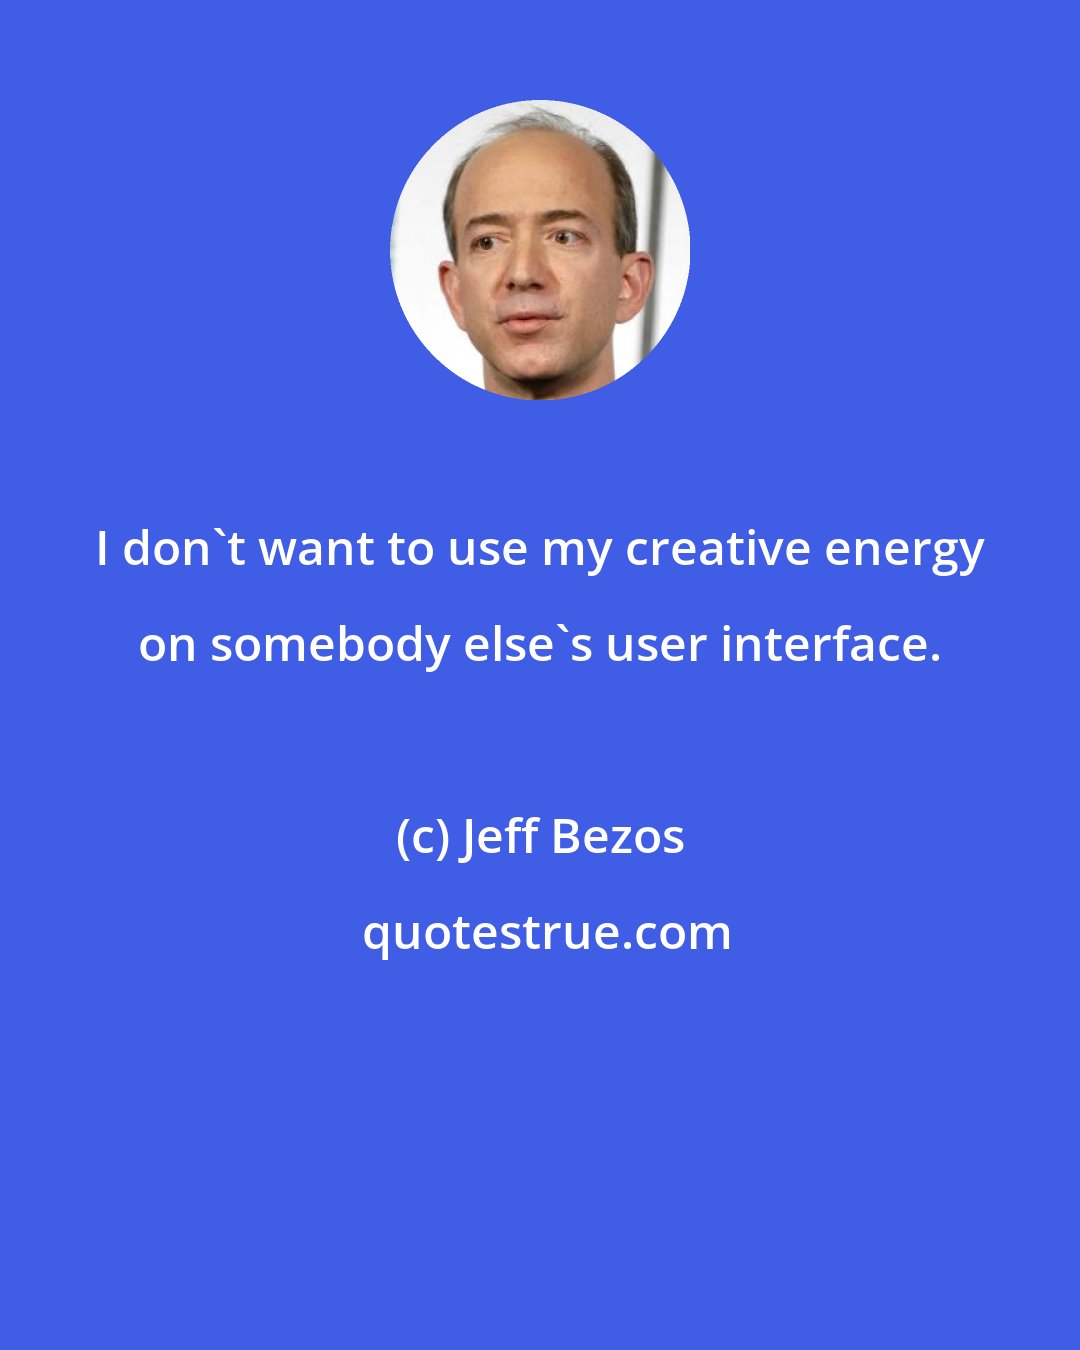 Jeff Bezos: I don't want to use my creative energy on somebody else's user interface.